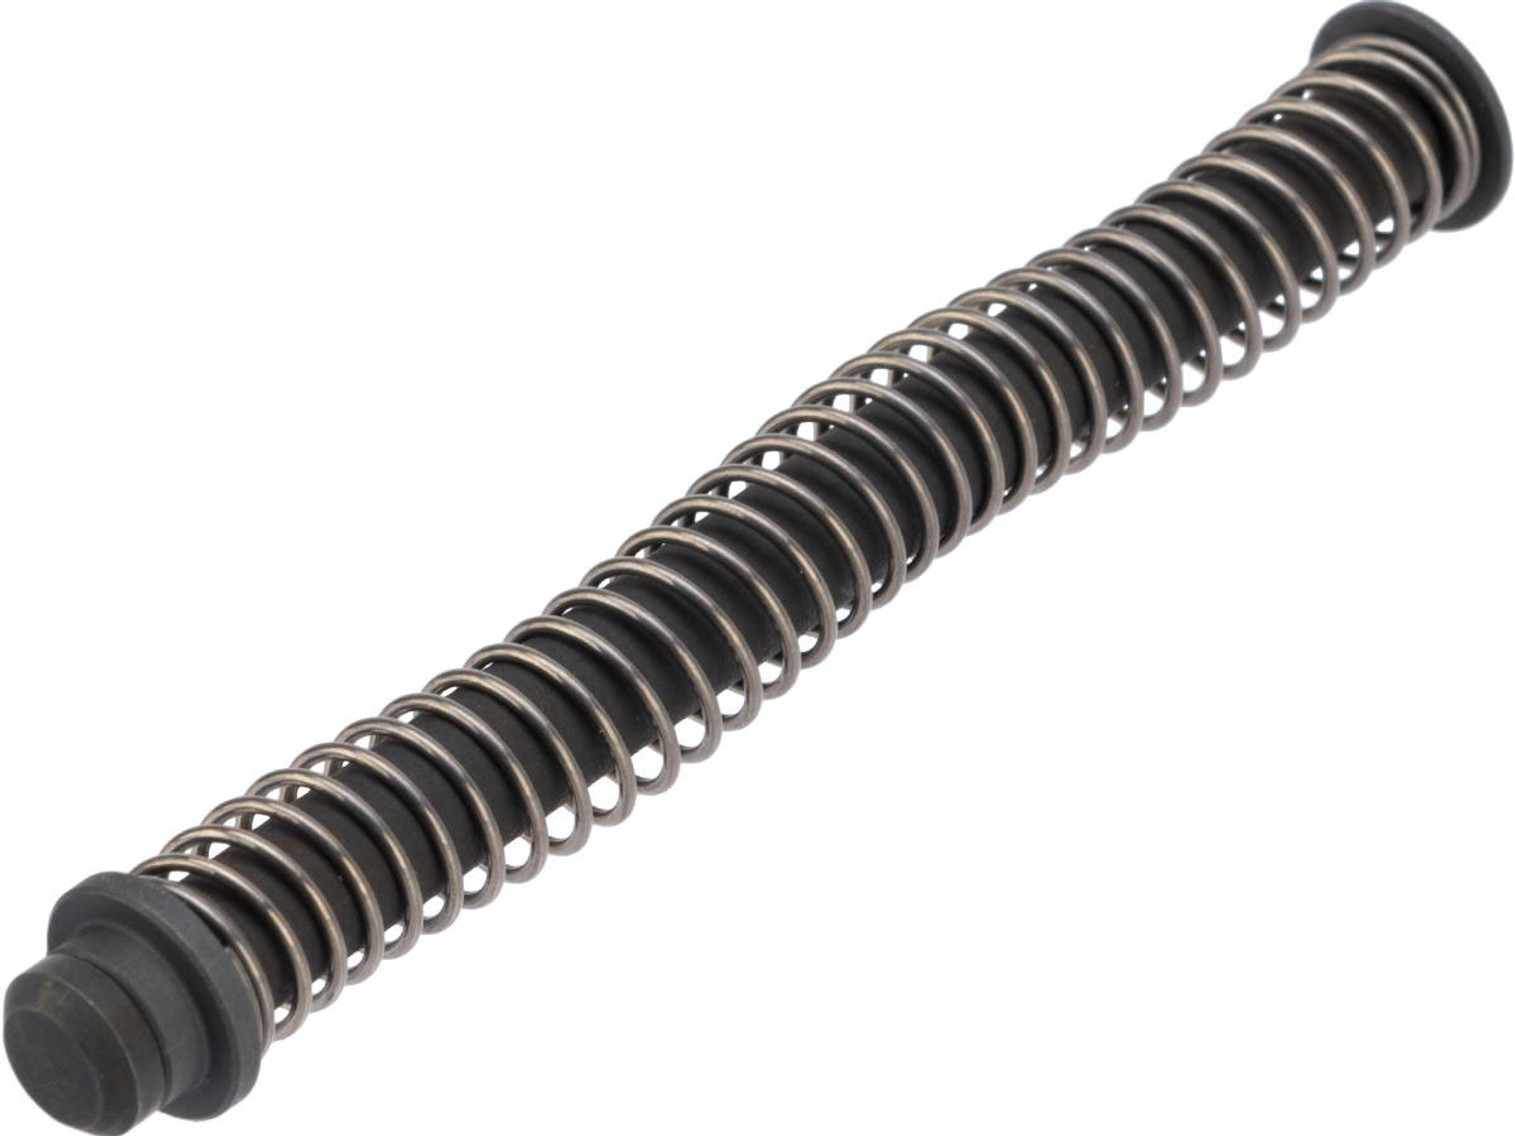 RA-Tech Steel Recoil Spring for 18c Series Gas Blowback GBB Airsoft Pistols